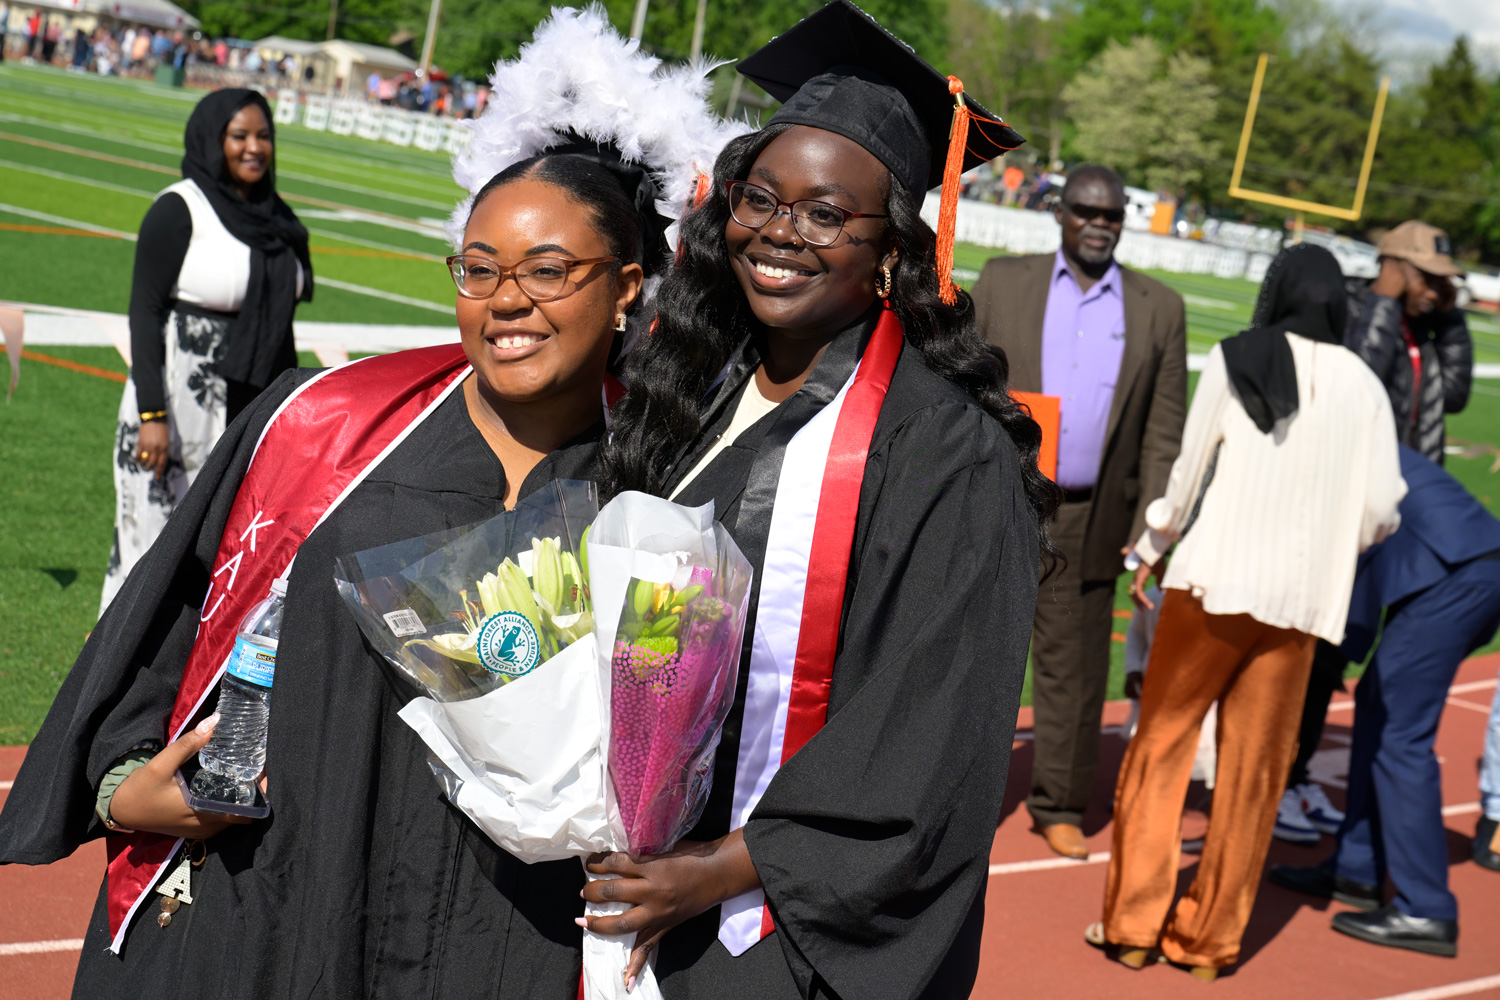 two students celebrating during commencement